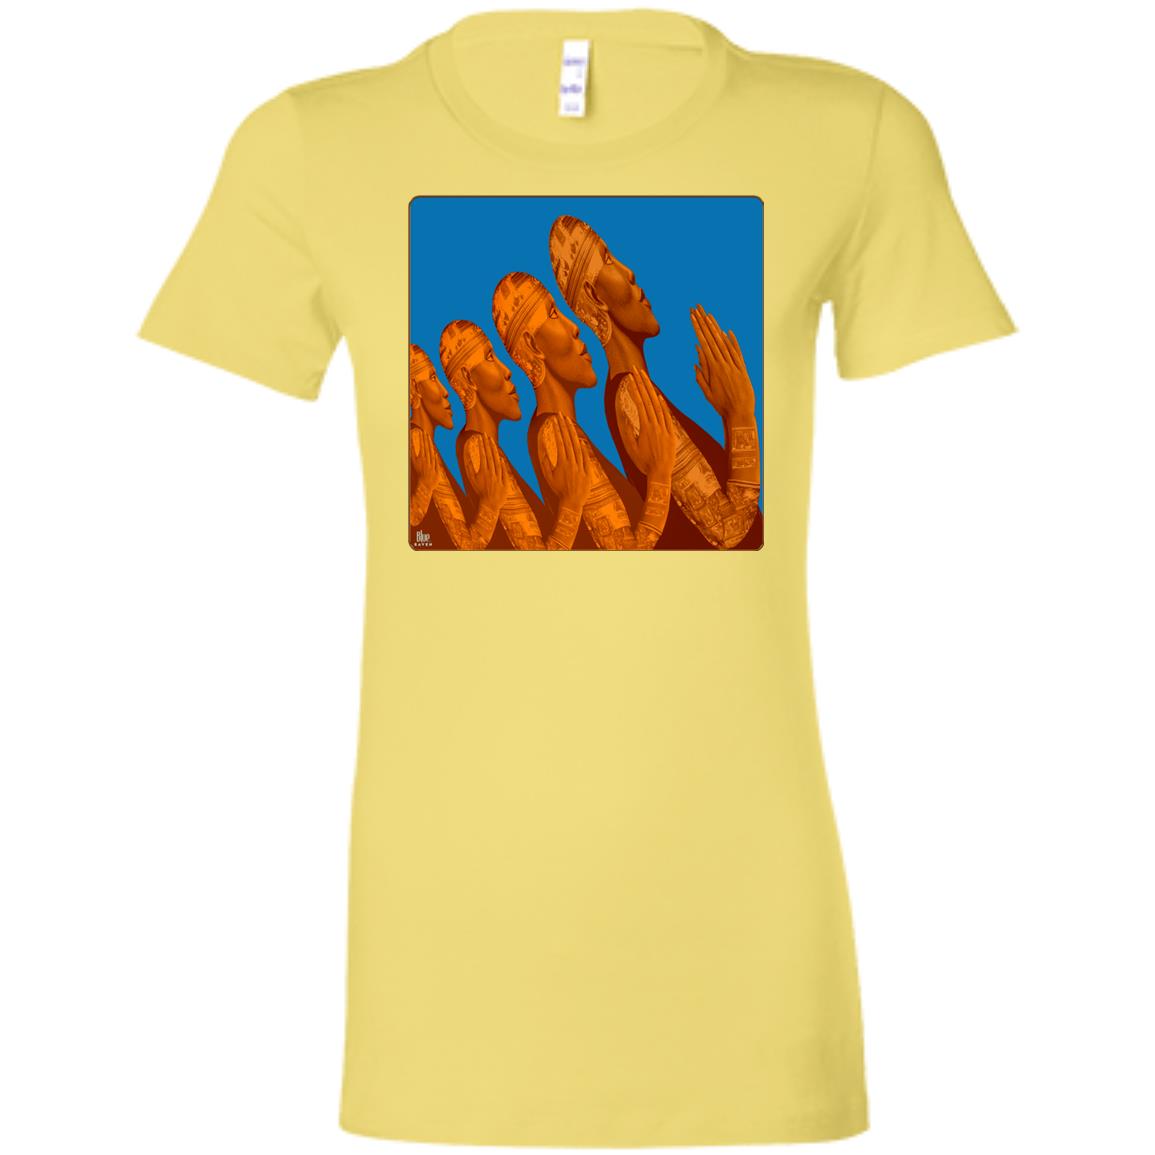 EMERGENCE - Women's Fitted T-Shirt